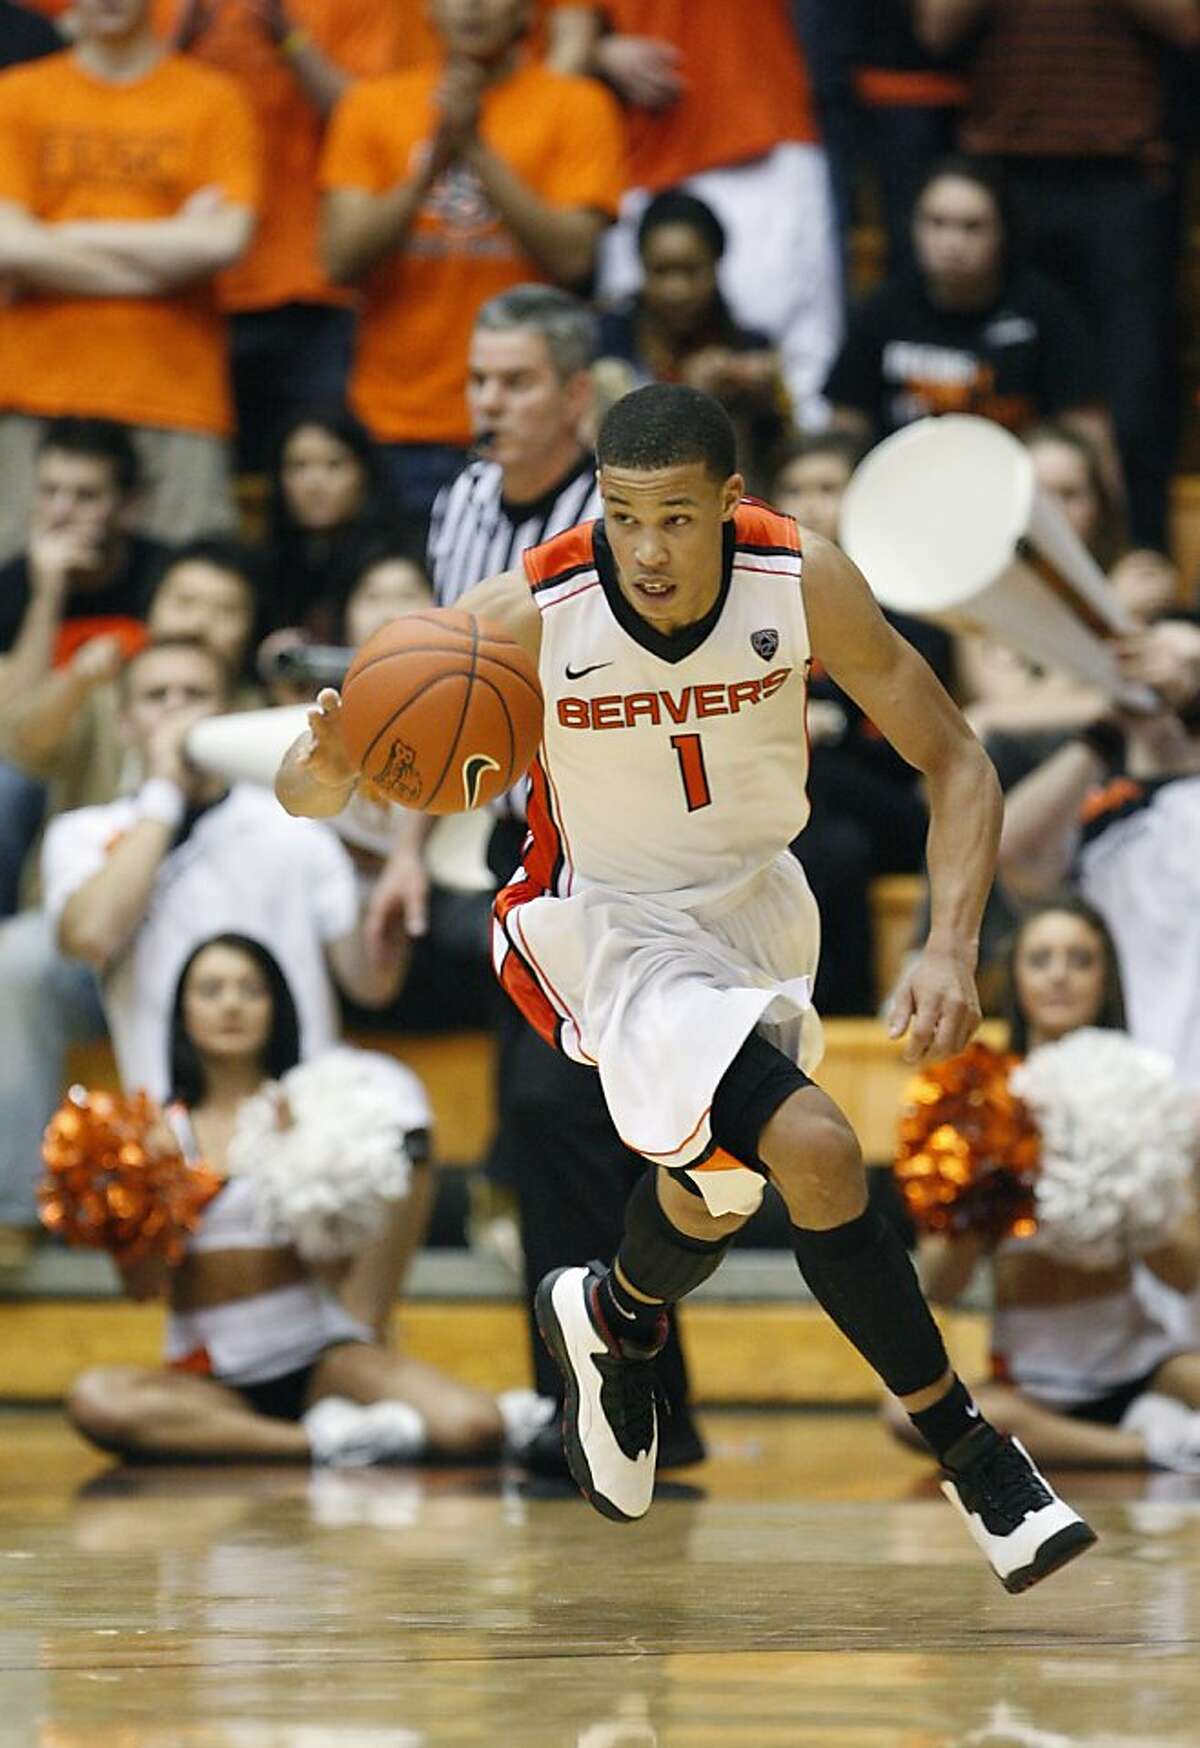 Oregon State guard Jared Cunningham (1) brings the ball up court in the second half during an NCAA college basketball game with Washington State Thursday, Feb. 9, 2012, in Corvallis, Ore.